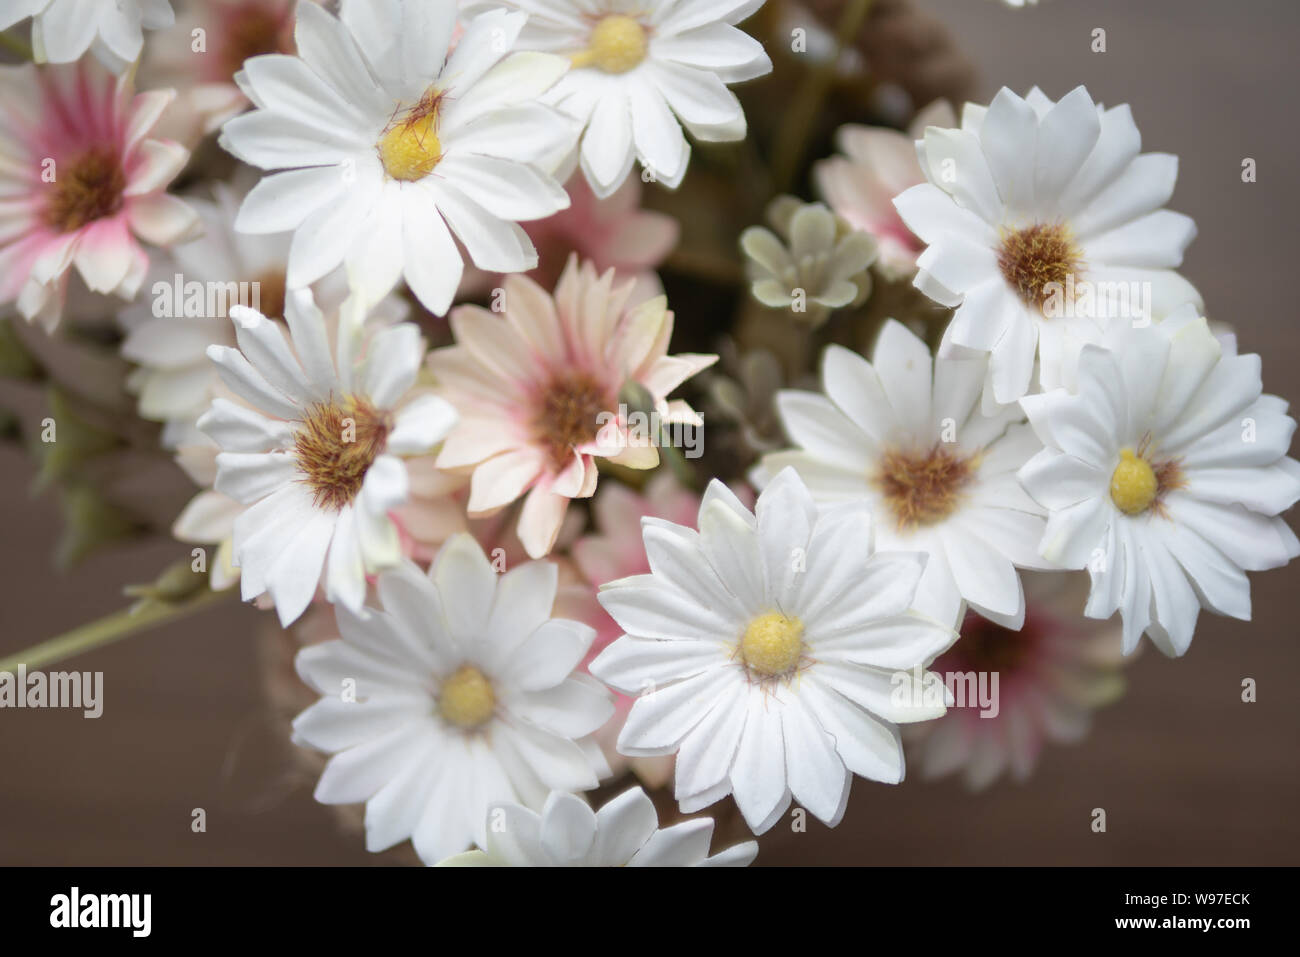 Close up white and pink flowers on the wooden table with yellow pollen. Top view blooming of fake flower. Stock Photo